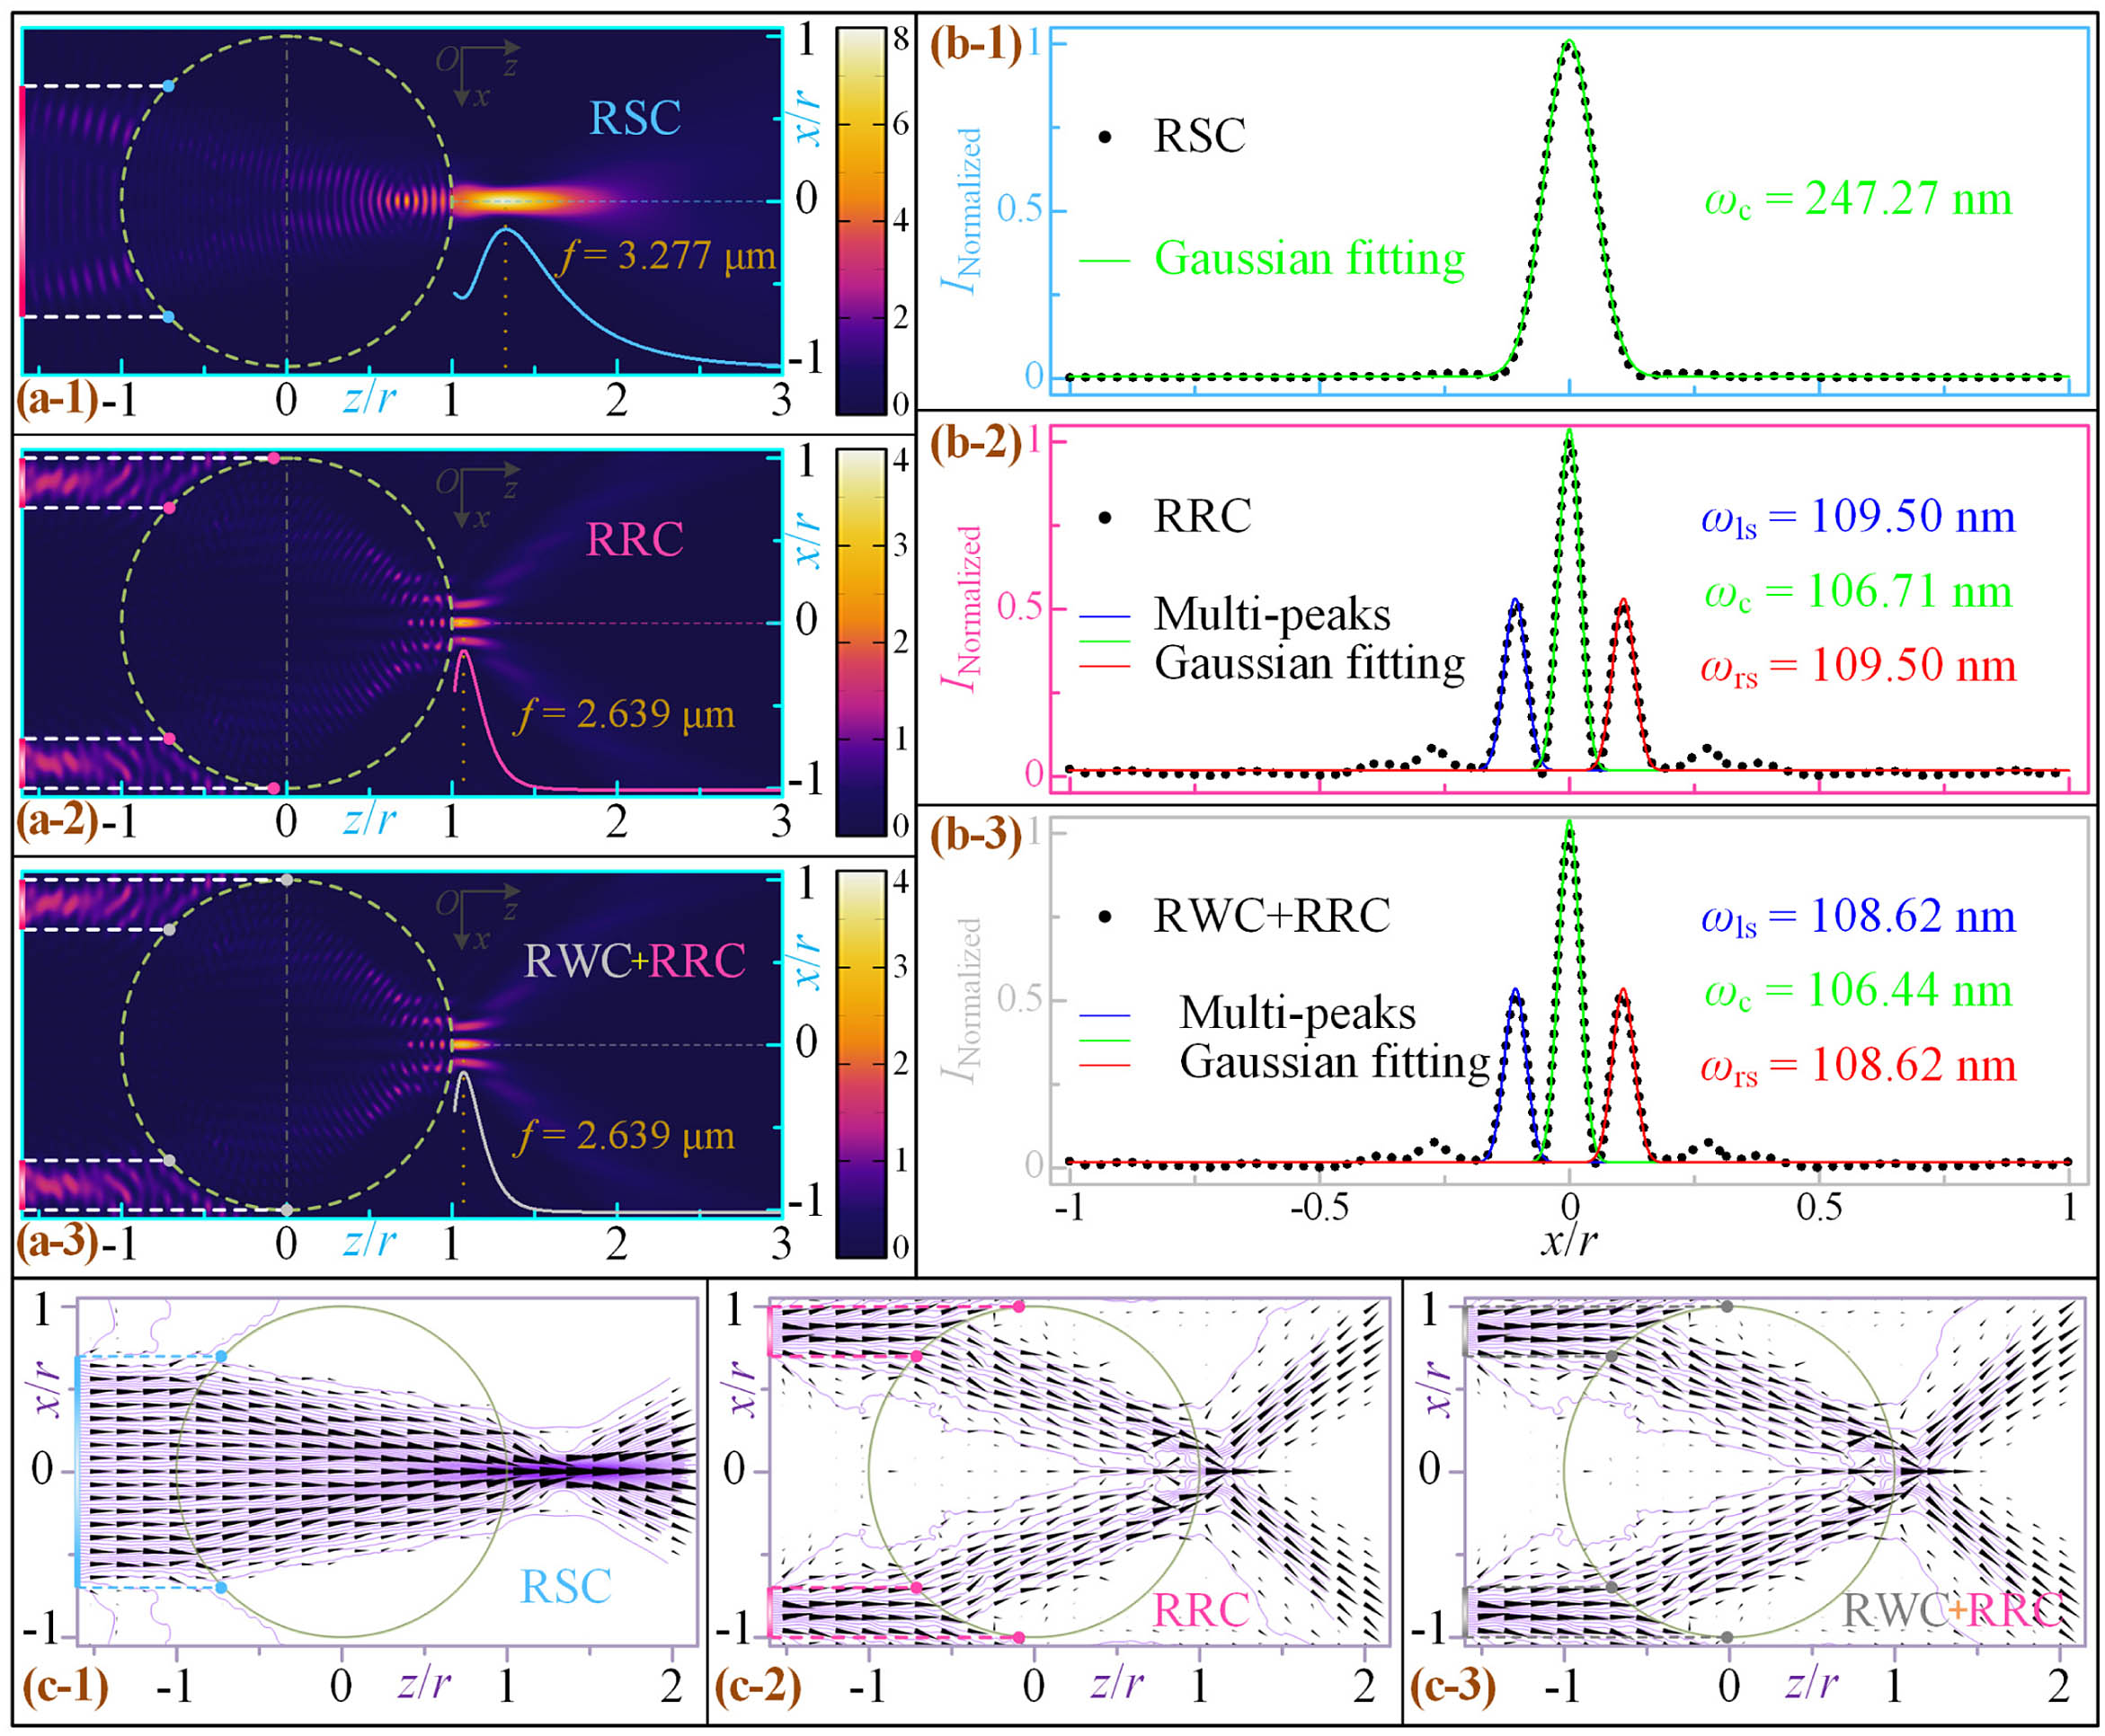 2D optical field distributions of light illuminating the (a-1) RSC, (a-2) RRC, and (a-3) composite region of “RWC + RRC” obtained from FEM-based full-wave simulations. The model parameters are: λ0=400 nm, r=2.5 μm, nm=1.5, ne=1.0. Insets: normalized spatial intensities of the focused light field from x/r=0, z/r=1 to x/r=0, z/r=3 for the cases of RSC (cyan-blue solid line), RRC (magenta-pink solid line), and “RWC + RRC” (light-gray solid line) irradiated by the plane wave. The vertical dotted line indicates the position of the focal point and focal distance f for each figure. (b-1)–(b-3) Normalized transverse light field profiles (black dots) at the focal point along x direction and the single-peak, multi-peak Gaussian fitting curves corresponding to (a-1)–(a-3), respectively. (c-1)–(c-3) Poynting vector distributions (black conical arrows) and energy flow streamlines (purple solid curves) for the cases of irradiation areas located in the regions of RSC, RRC, and “RWC + RRC,” respectively.